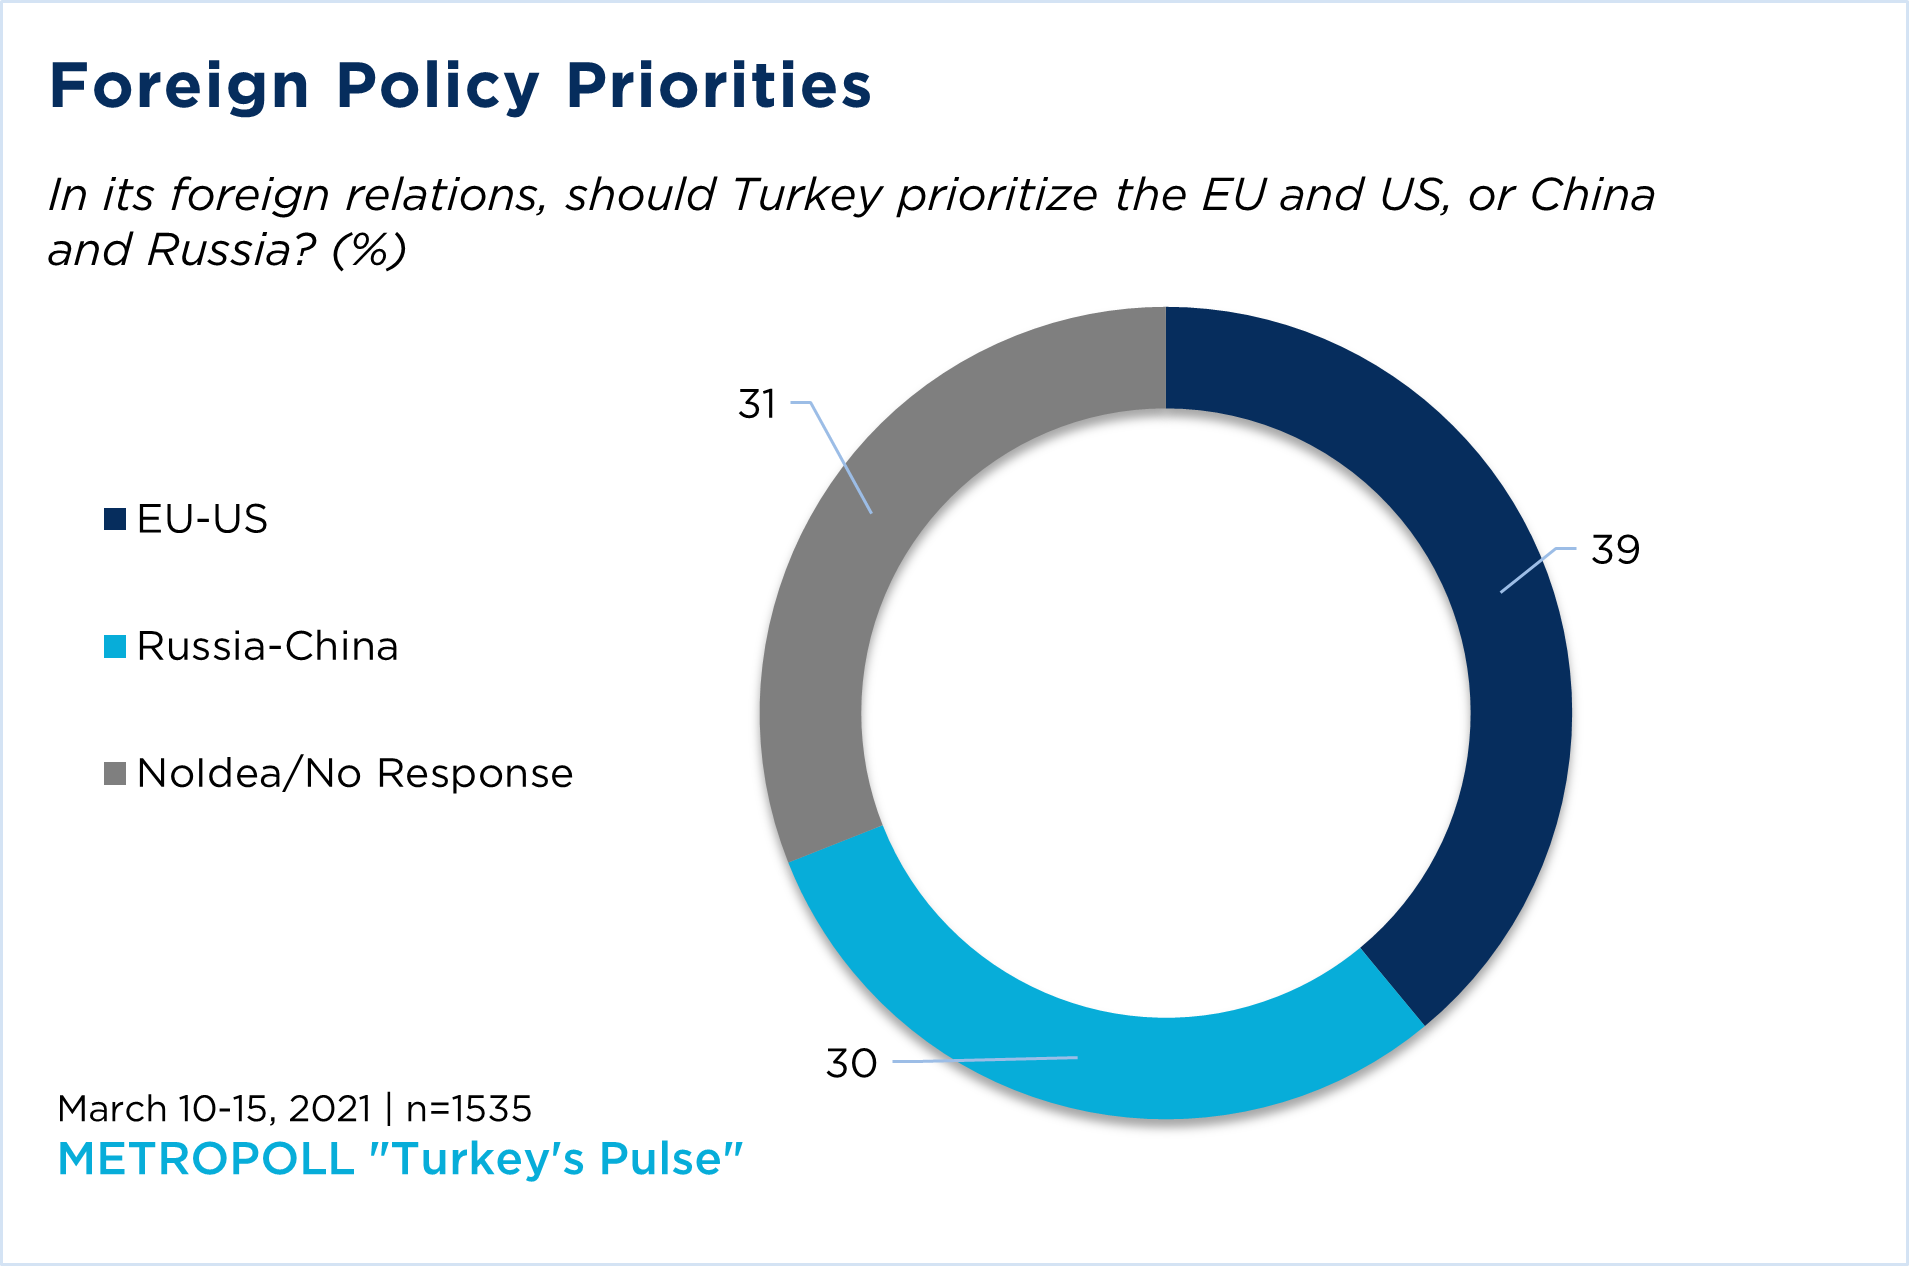 "a pie chart showing Turkish views on foreign policy priorities"